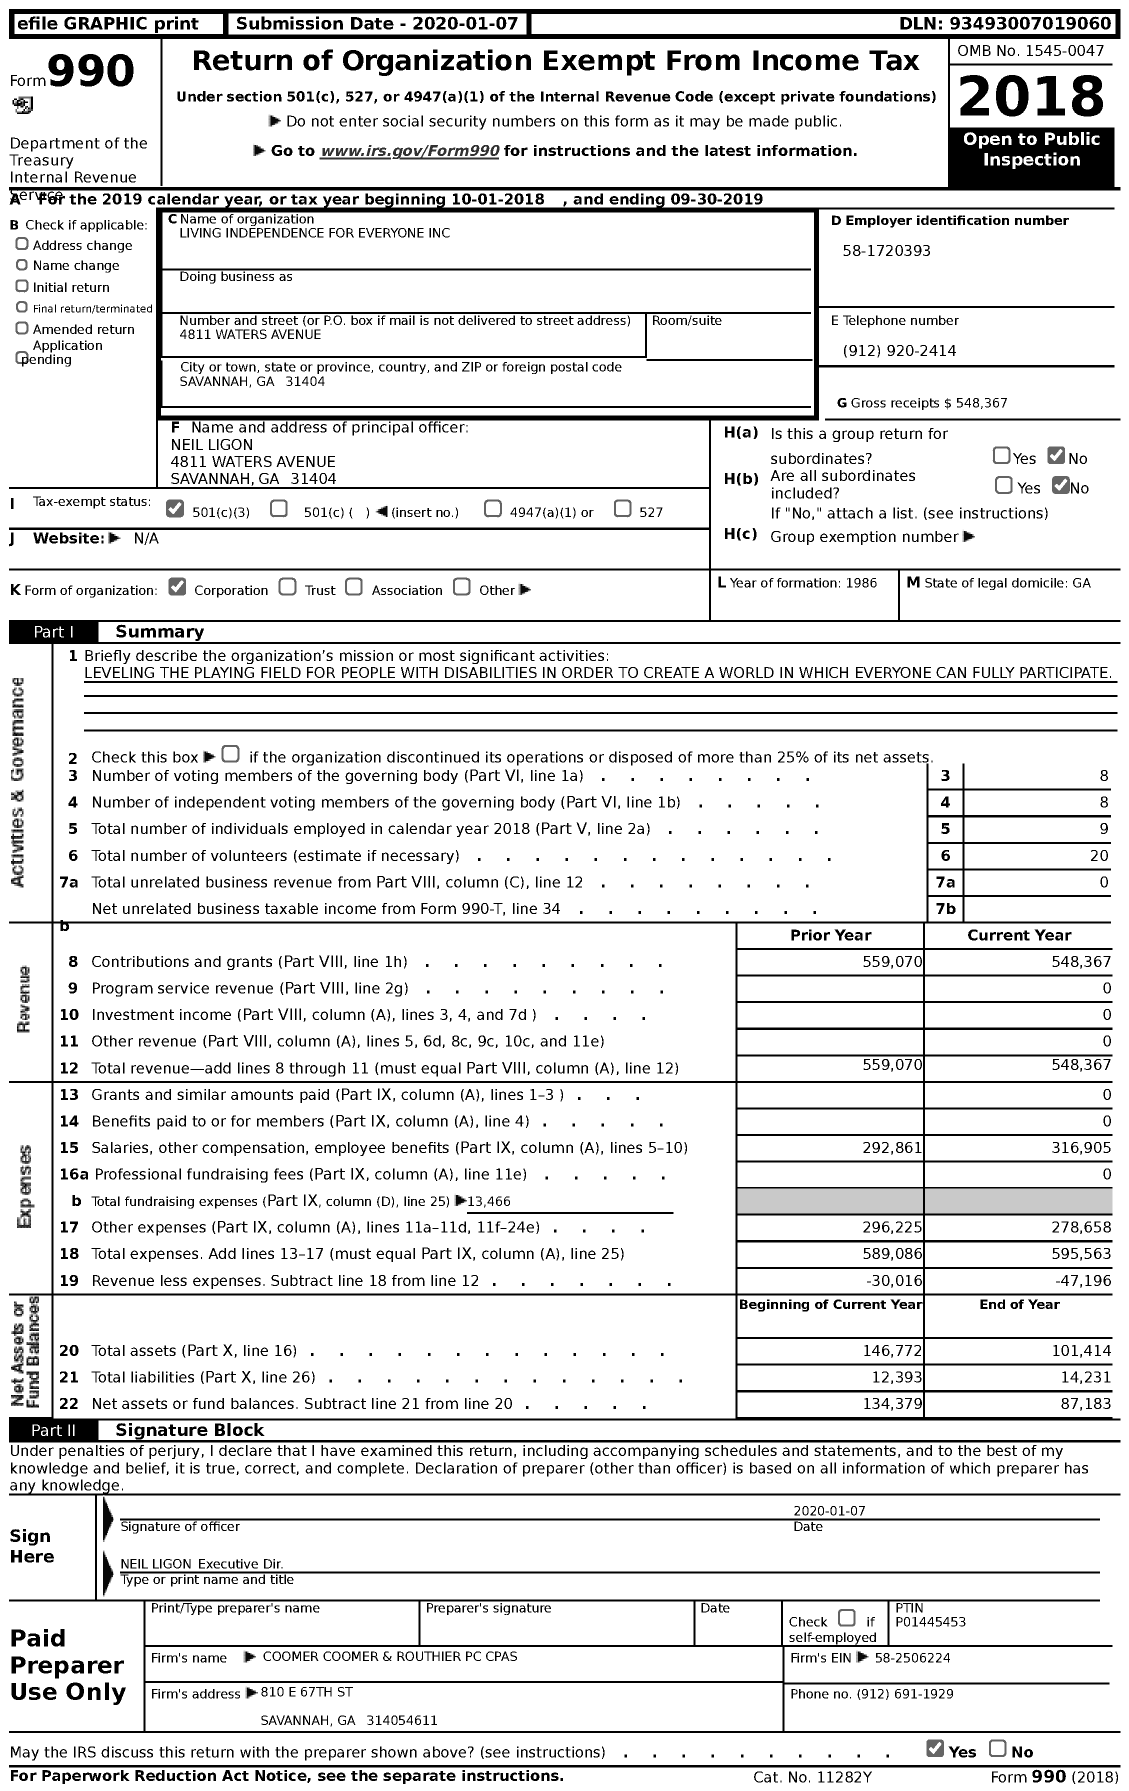 Image of first page of 2018 Form 990 for Living Independence for Everyone